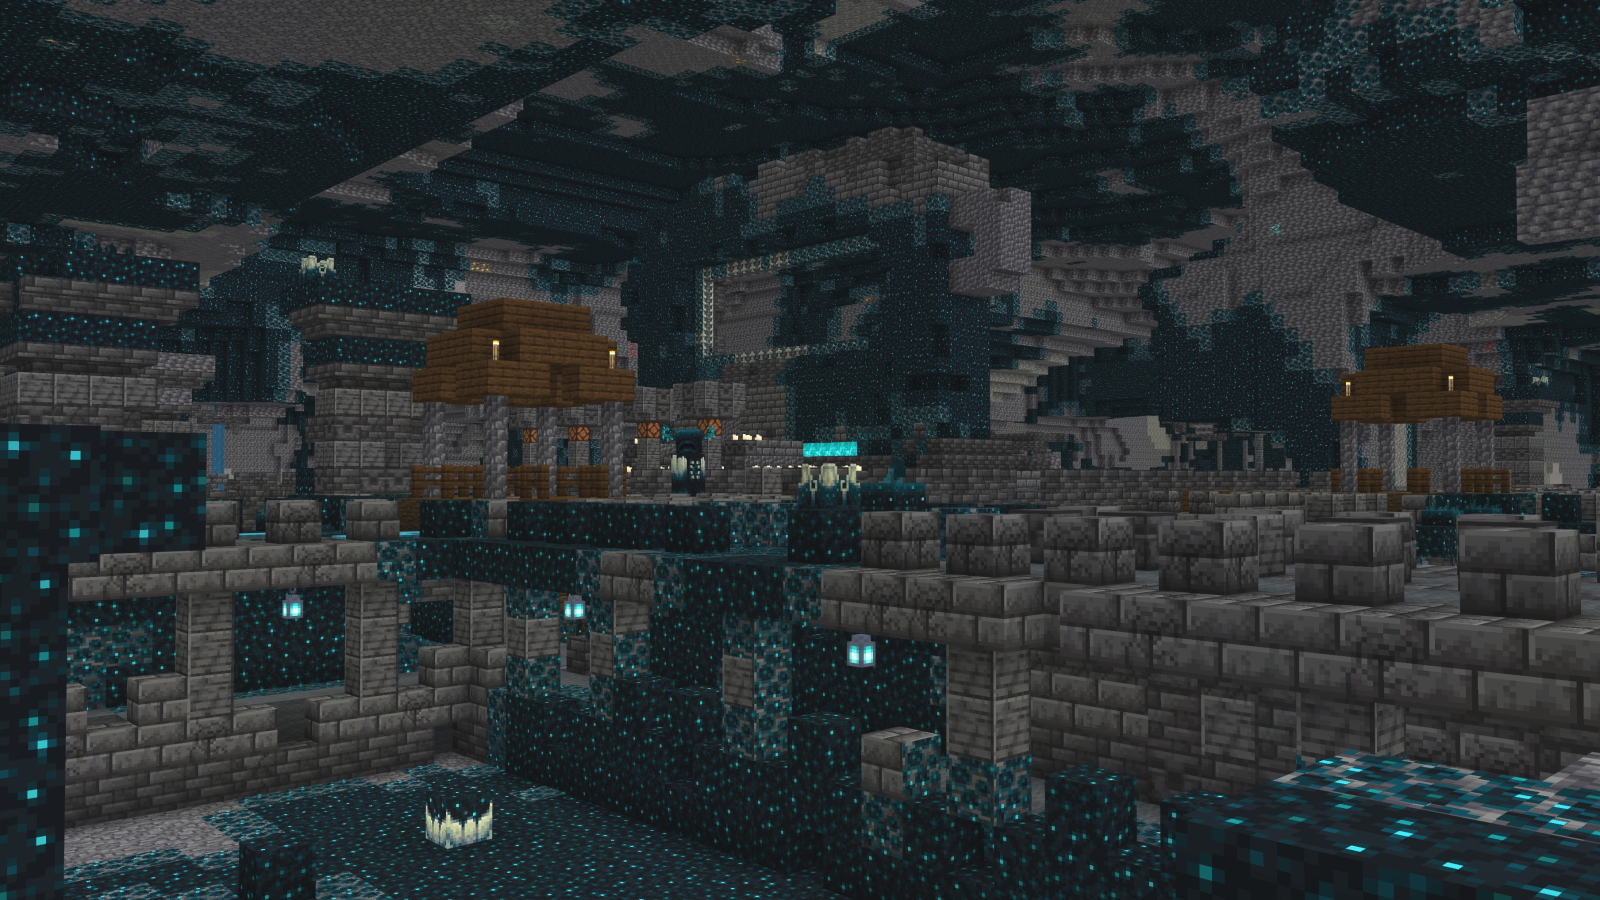 A Minecraft screenshot showing increased sculk patches in an Ancient City.